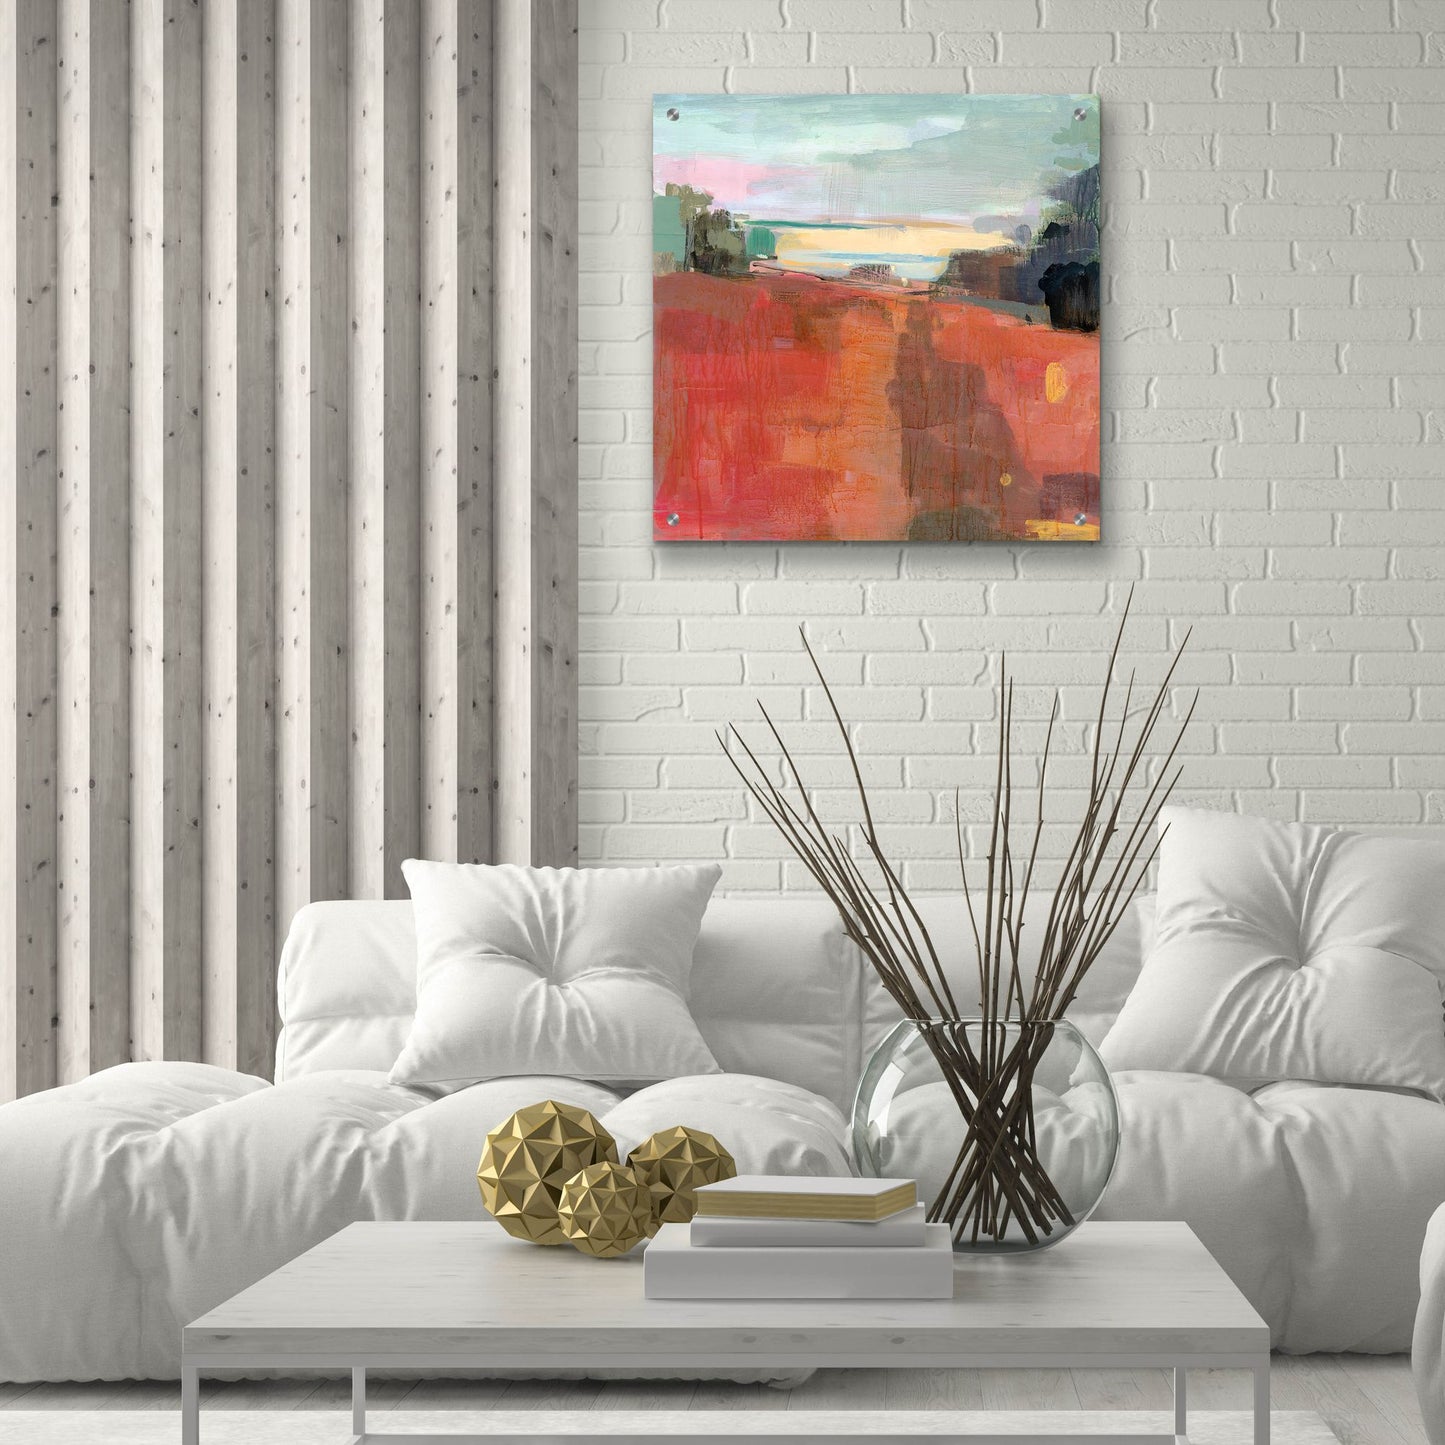 Epic Art ' Path To The River' by Kathleen Robbins, Acrylic Glass Wall Art,24x24